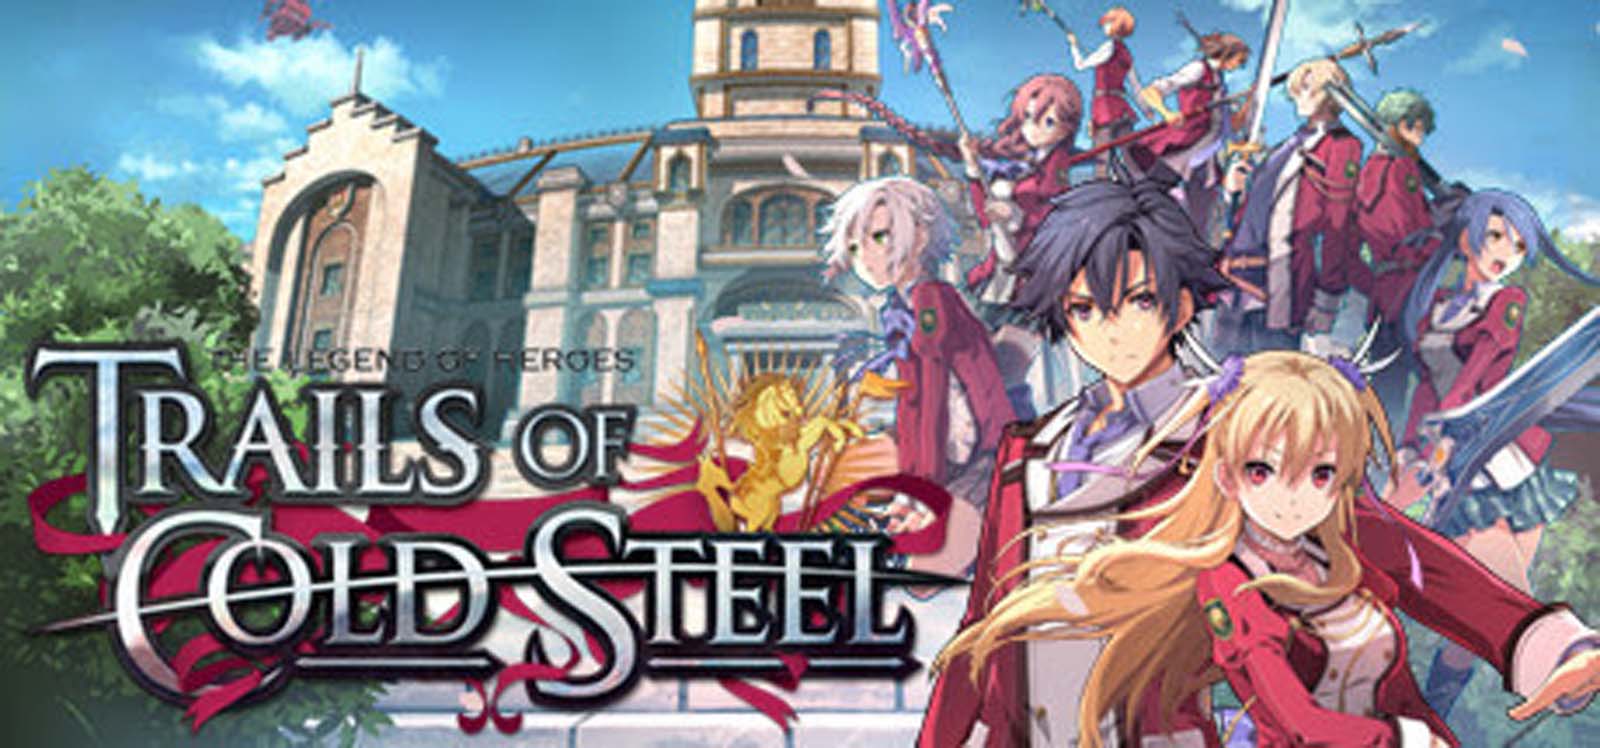 The Legend of Heroes VIII: Trails of Cold Steel